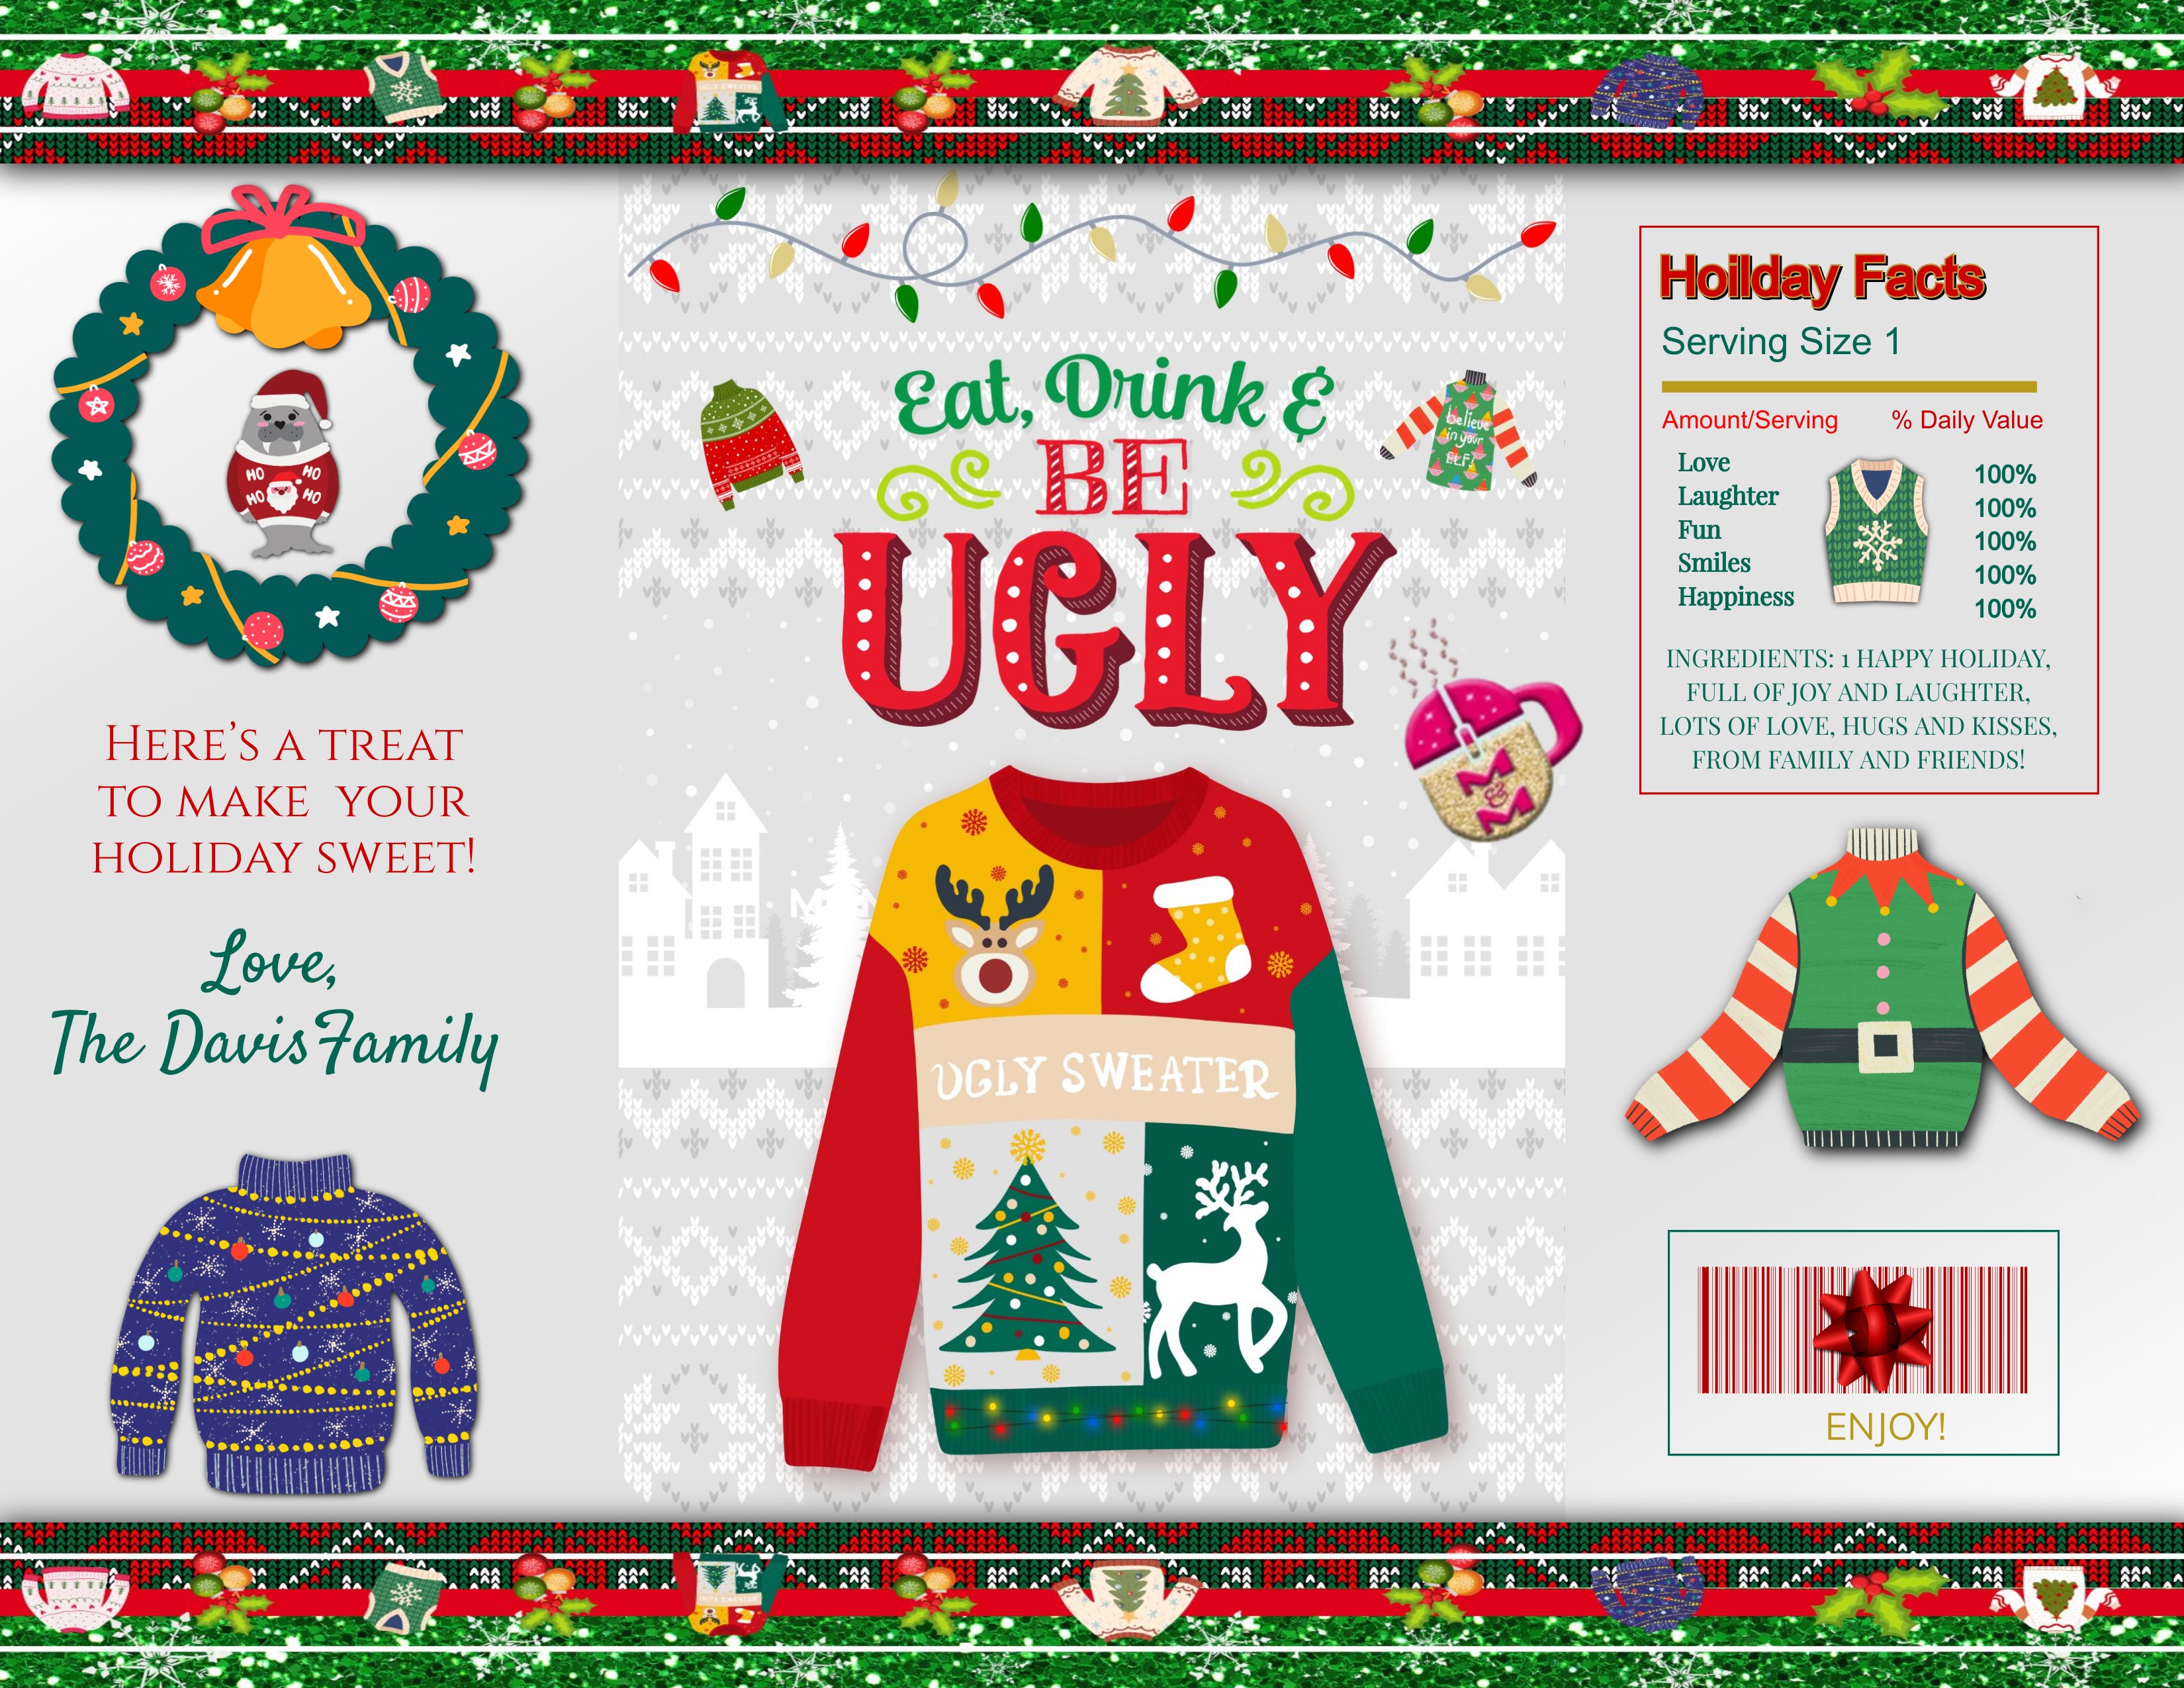 Editable Ugly Sweater Party Chip Favor Bag Set | Ugly Sweater Christmas Favor Bags | Holiday Party Favors | Holiday Gift Bags | Christmas Templates | Ugly Sweater Party Supplies